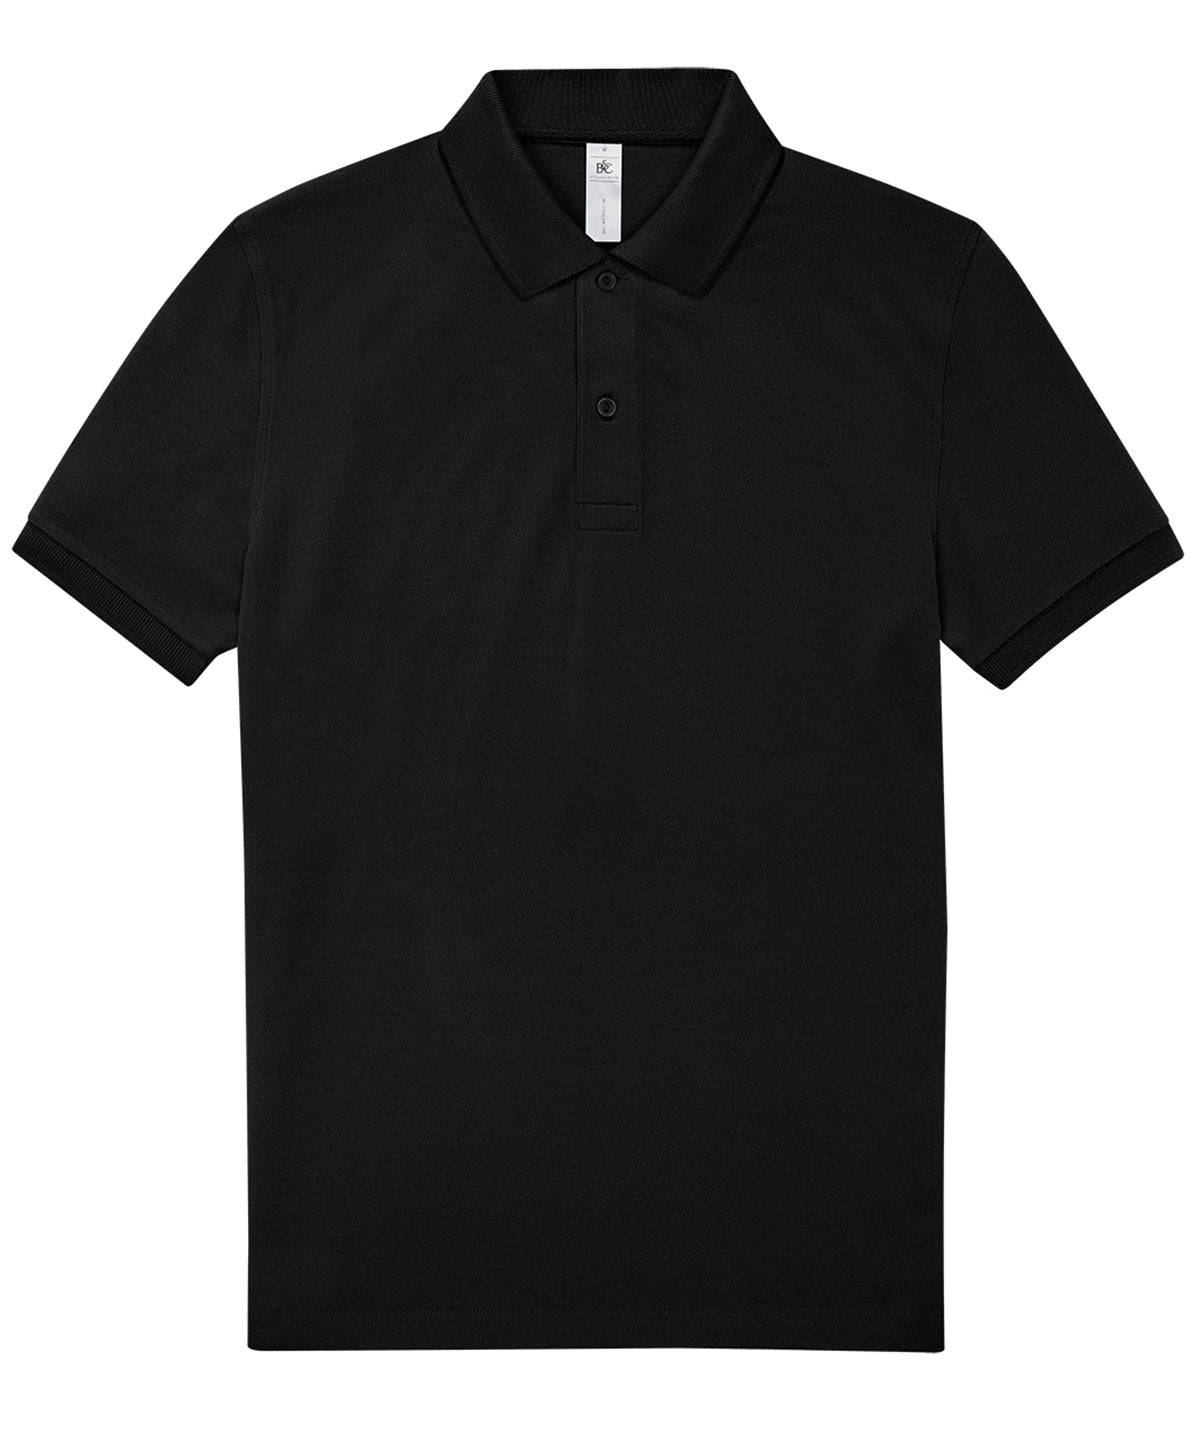 B&C Collection My Polo 180 Black